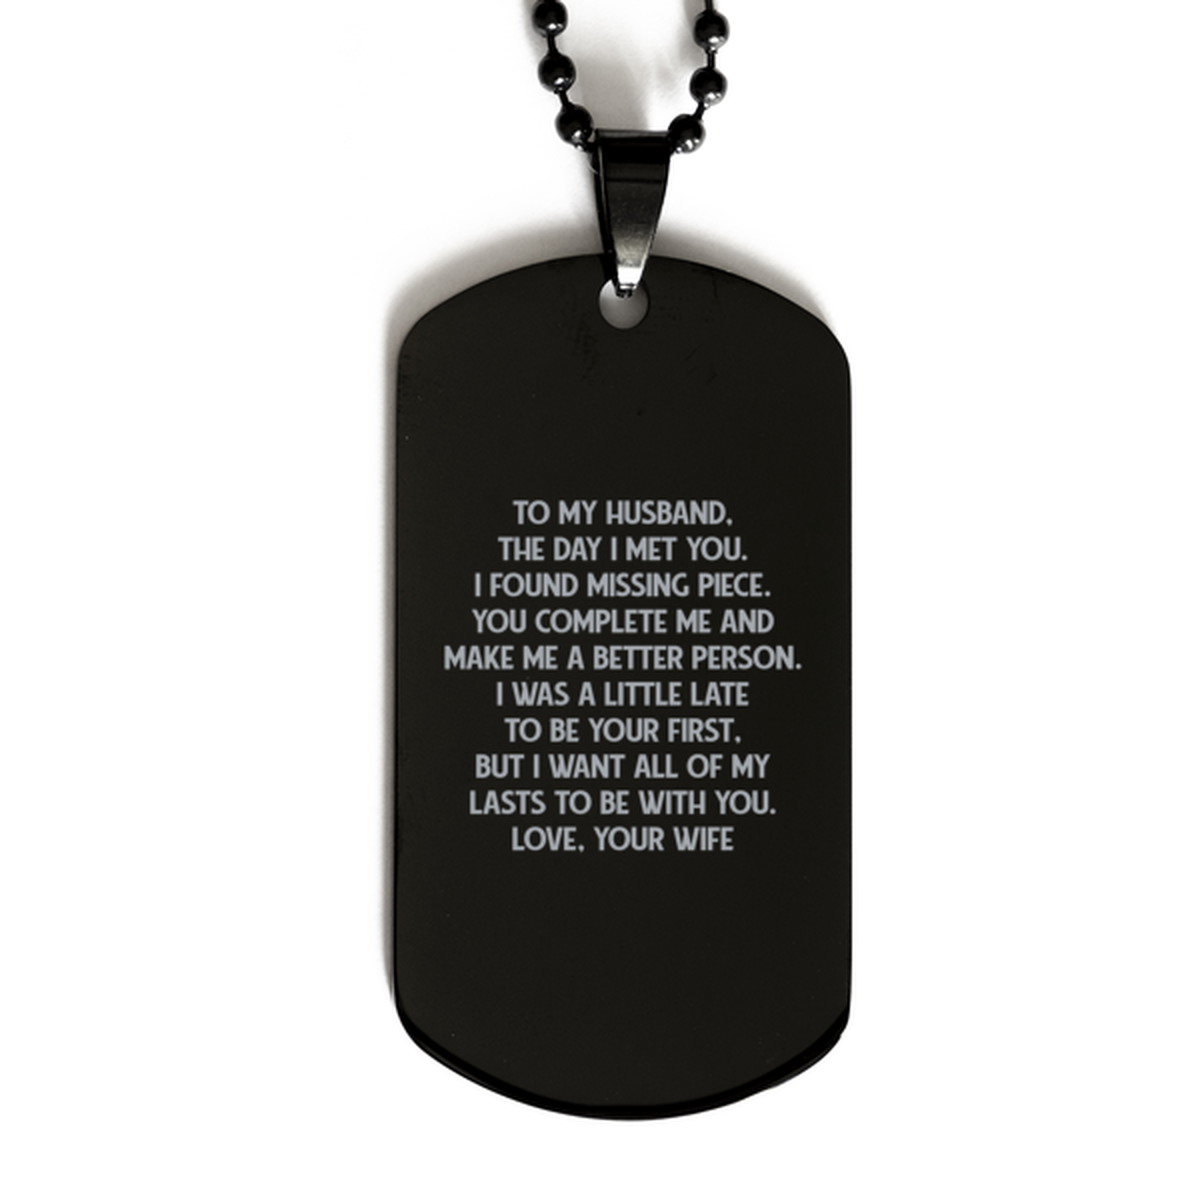 To My Husband Black Dog Tag, I Found Missing Piece, Anniversary Gifts For Husband From Wife, Birthday Gifts For Men